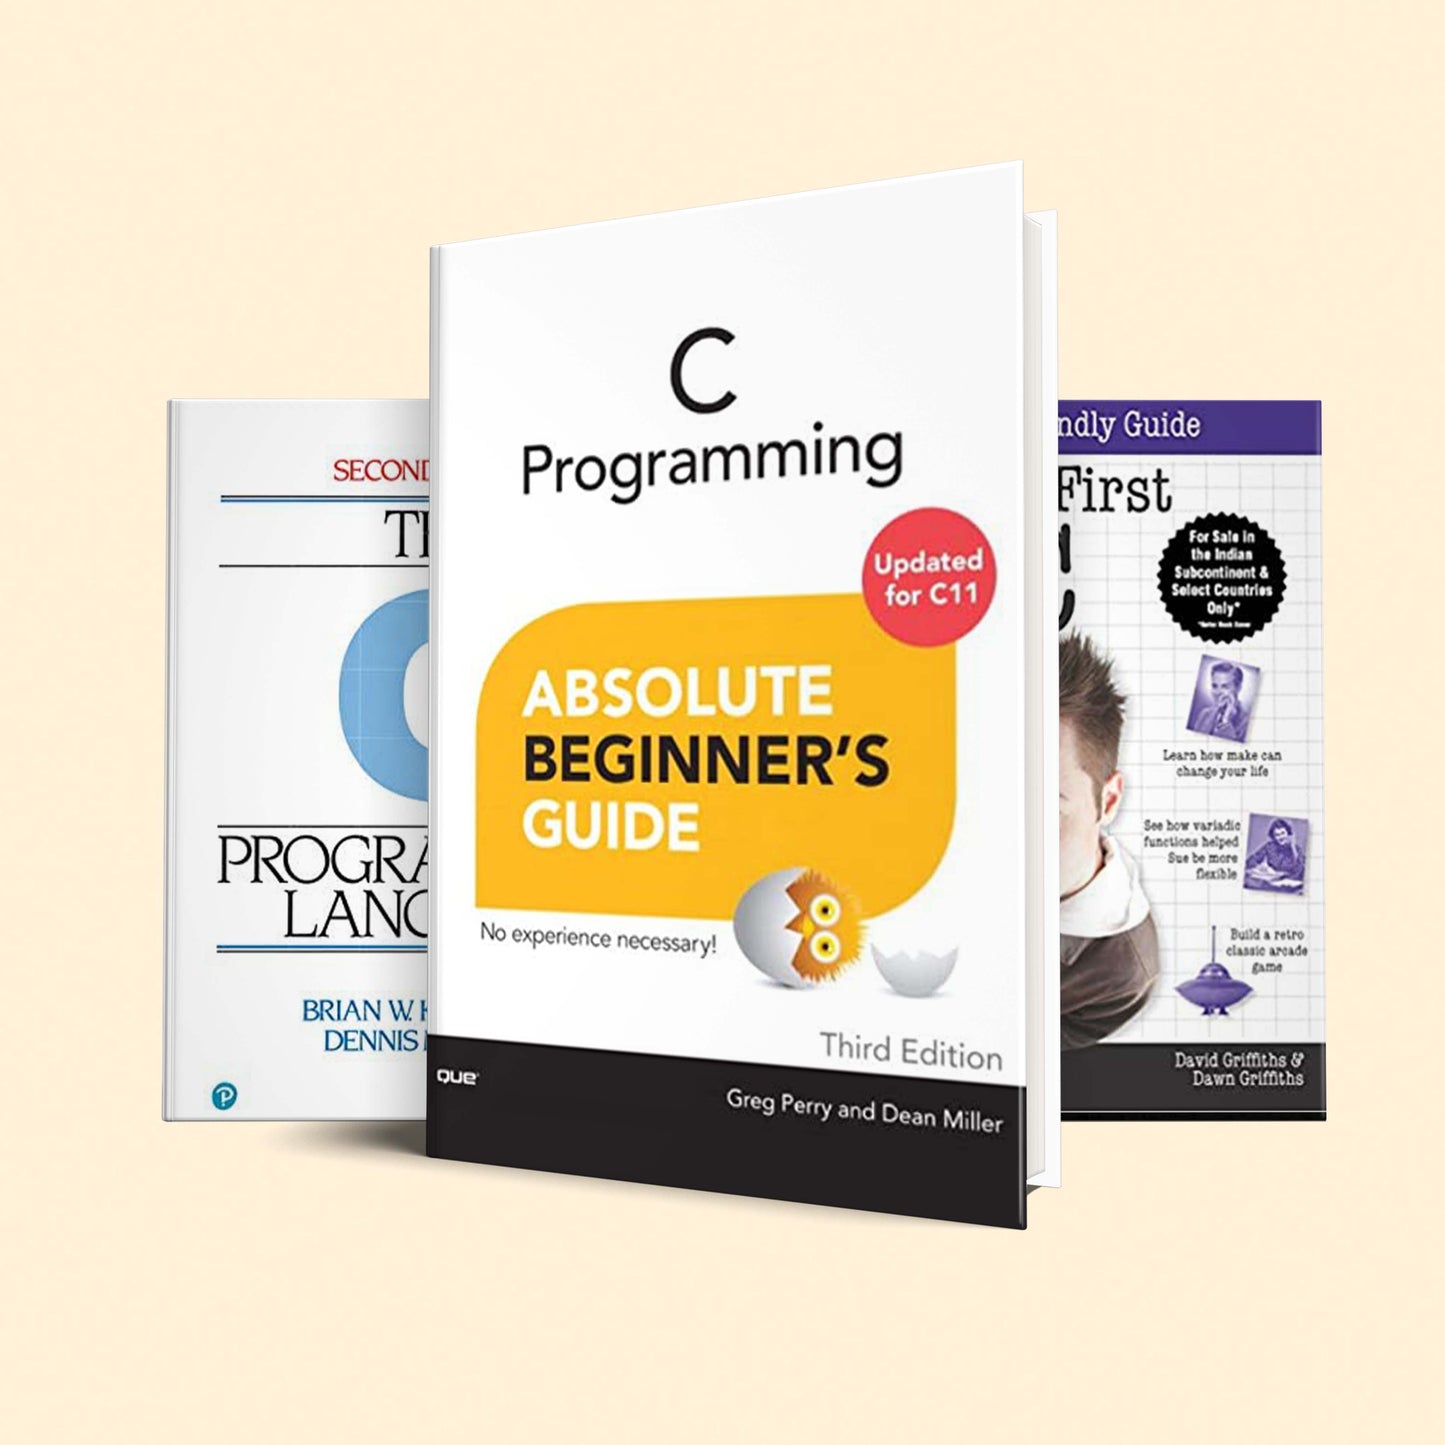 3 C Programming book set : C Programming Absolute Beginner's Guide, The C Programming Language (2nd Edition), Head First C